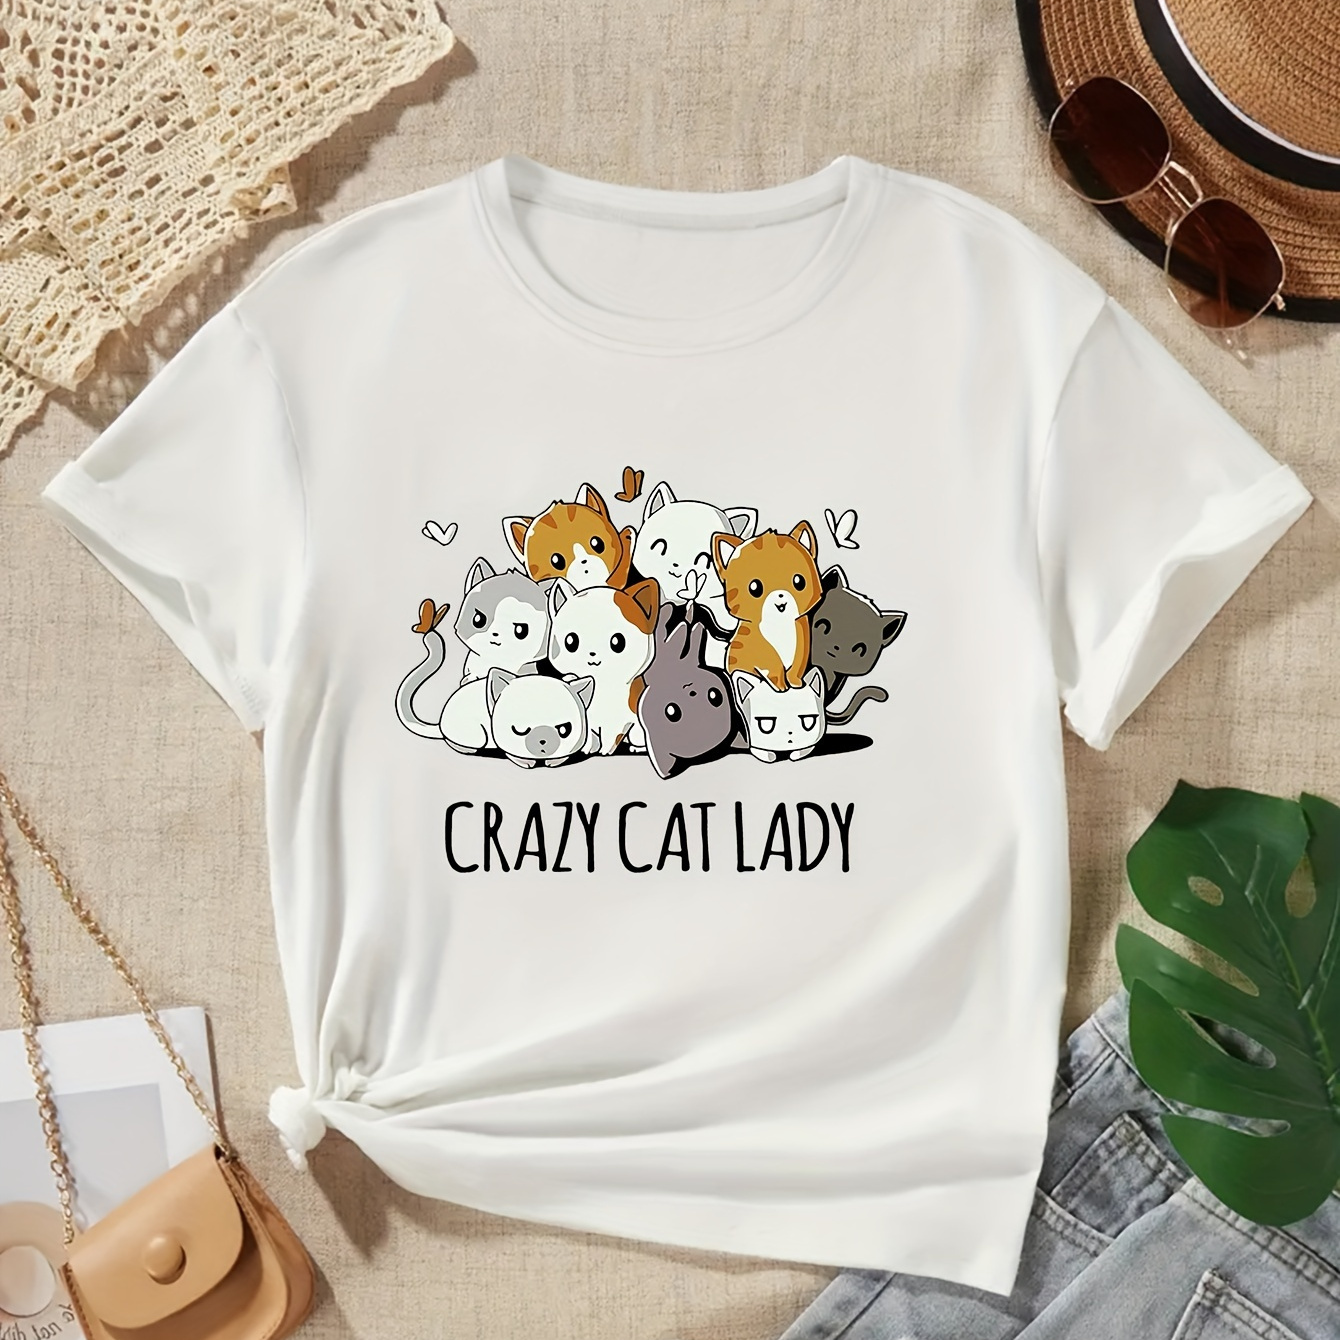 

Crazy Cat Lady And Cute Anime Cats Graphic Print, Girls' Casual Crew Neck Short Sleeve T-shirt, Comfy Top Clothes For Spring And Summer For Outdoor Activities